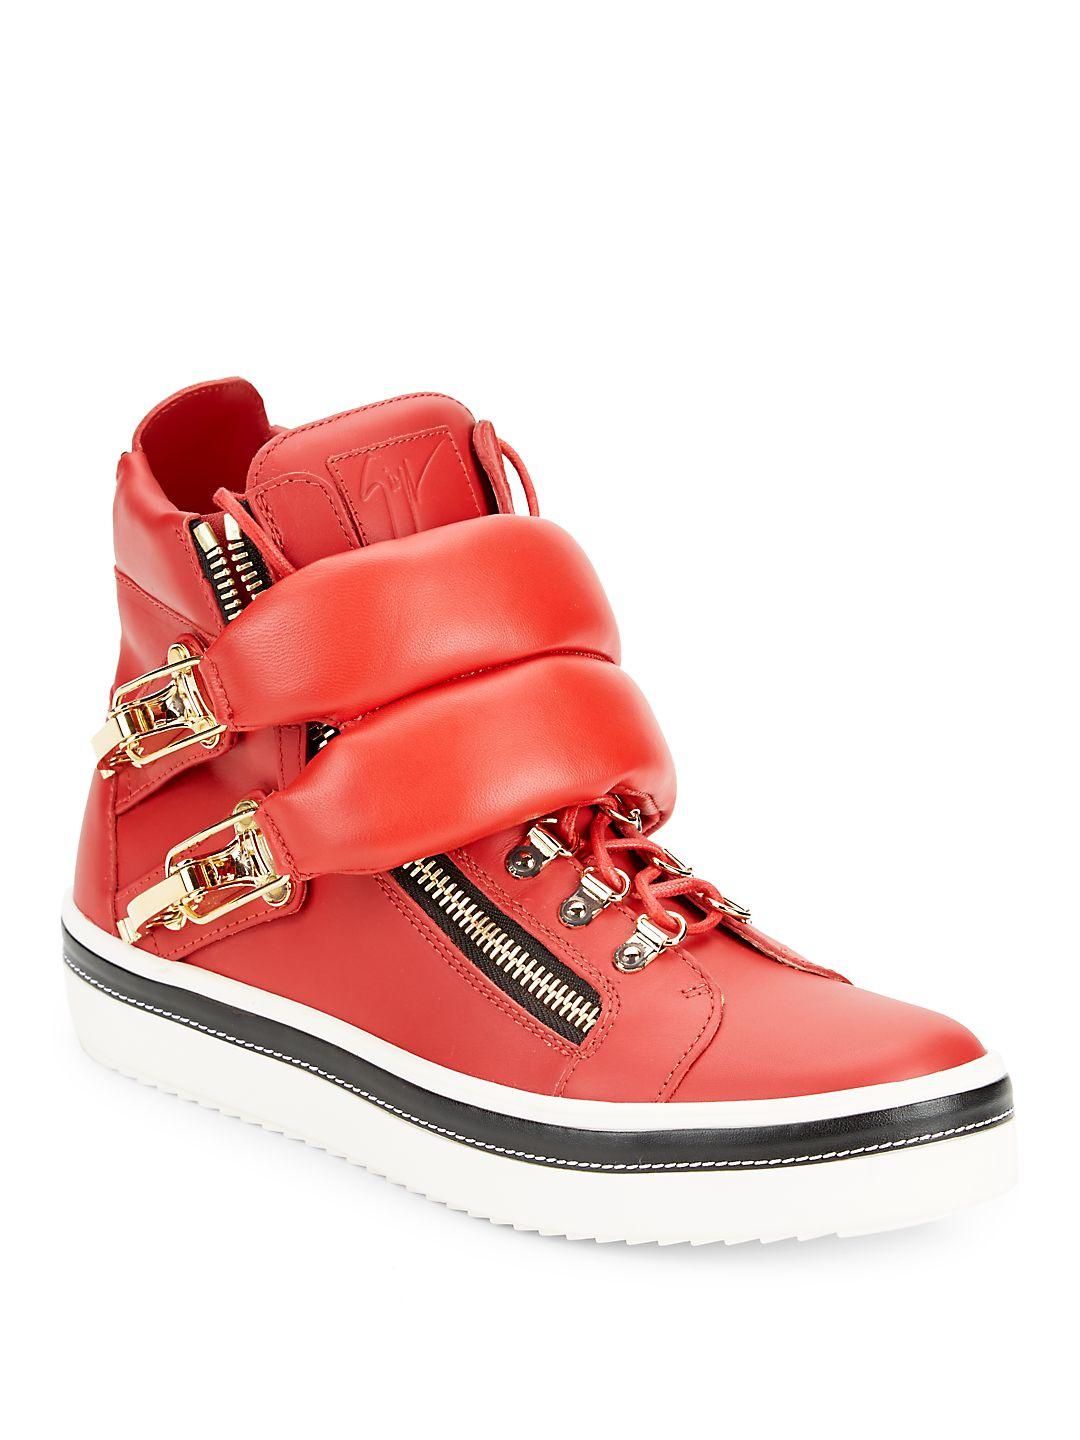 puffy high top sneakers